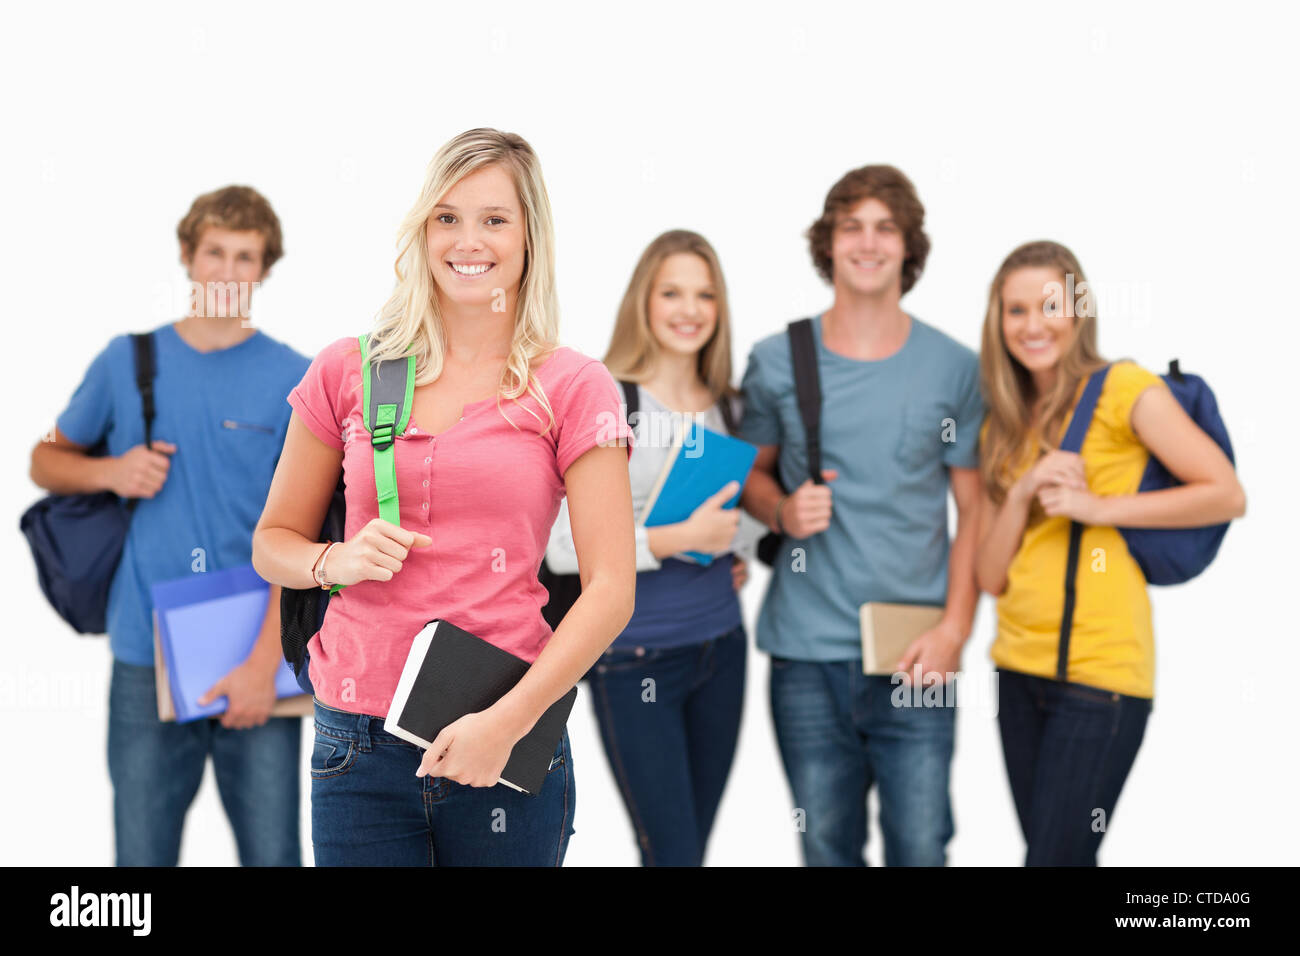 Smiling group stand together with one girl standing in front Stock Photo